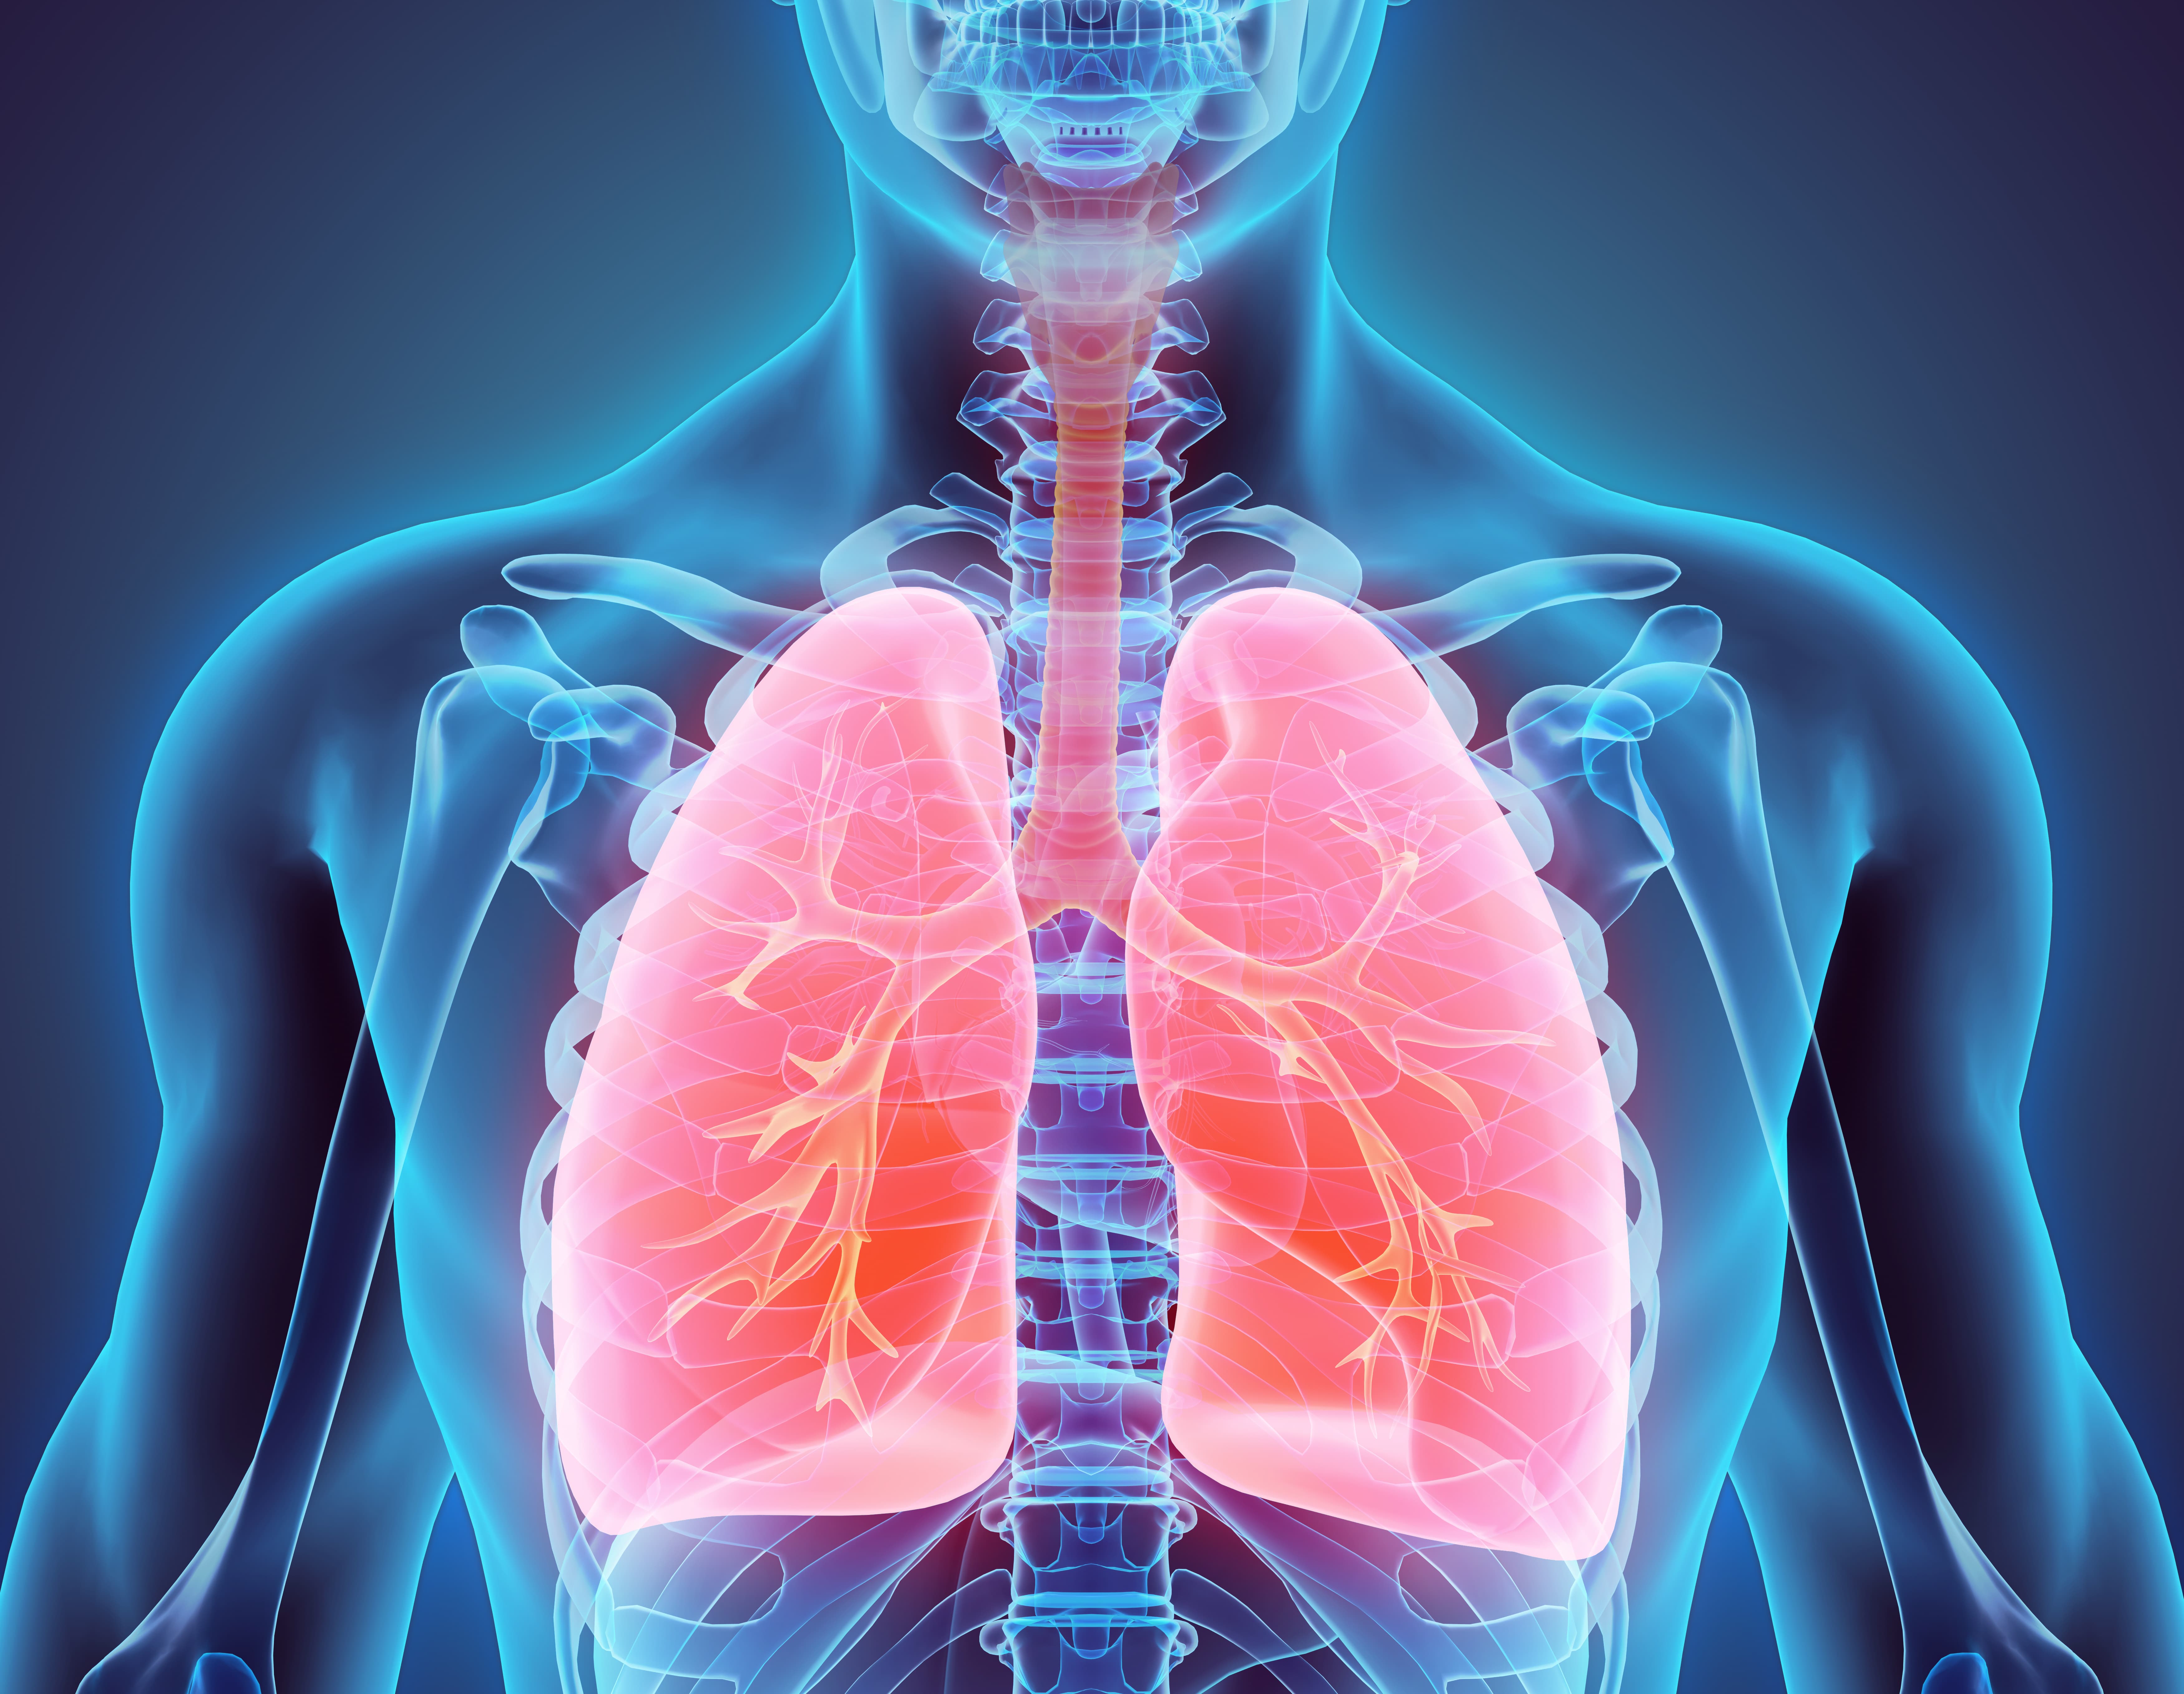 Comorbidities Among Patients With COPD Impact Outcomes, Require Further Research